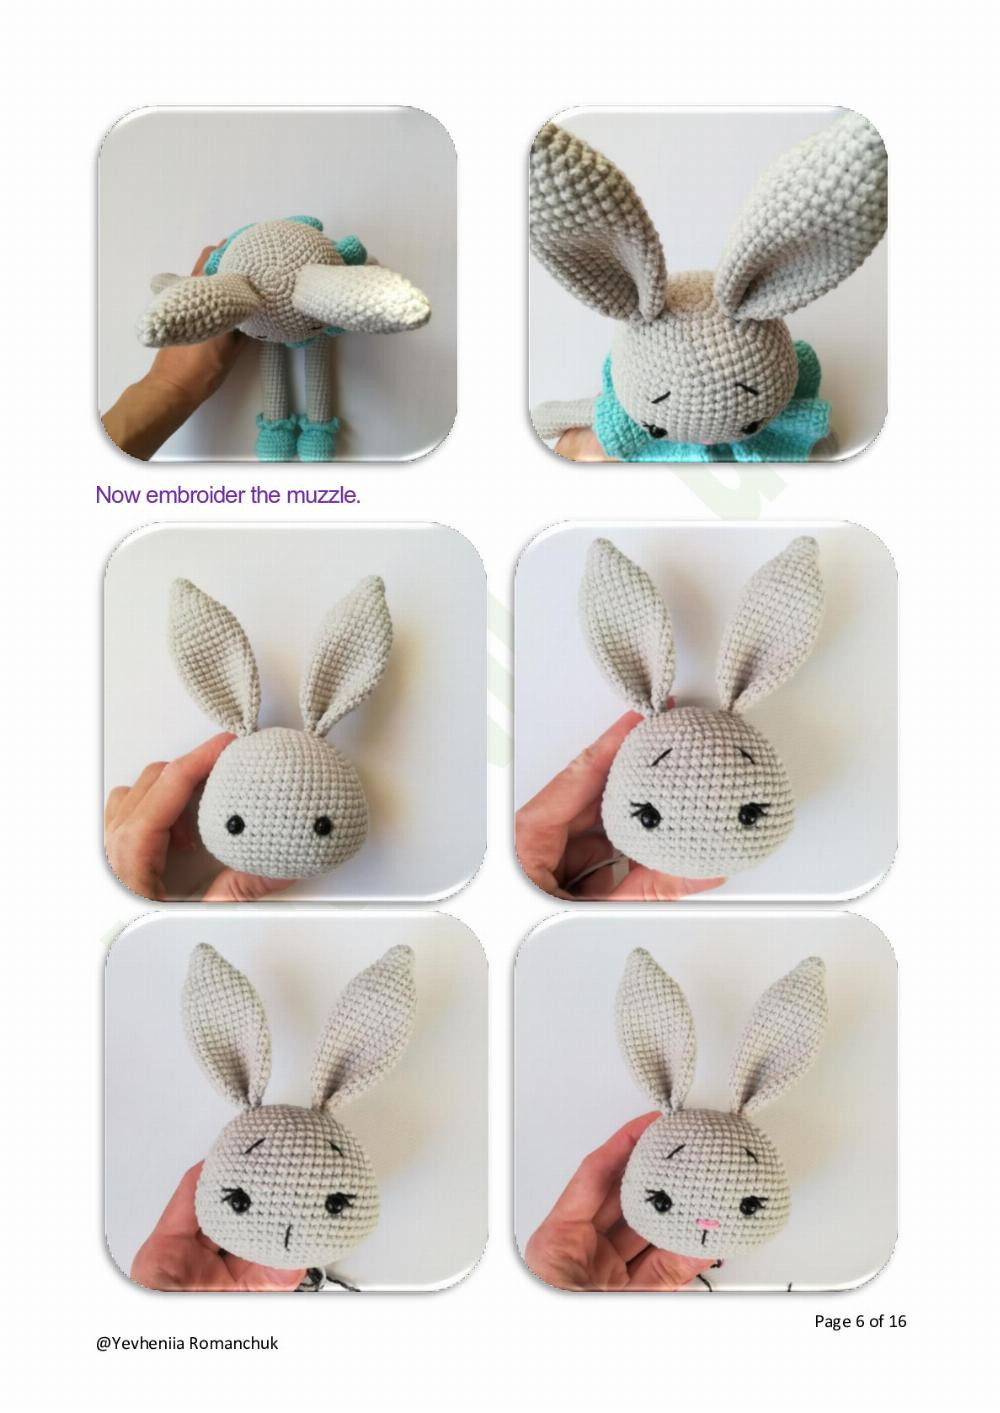 This is the original pattern of Lila bunny